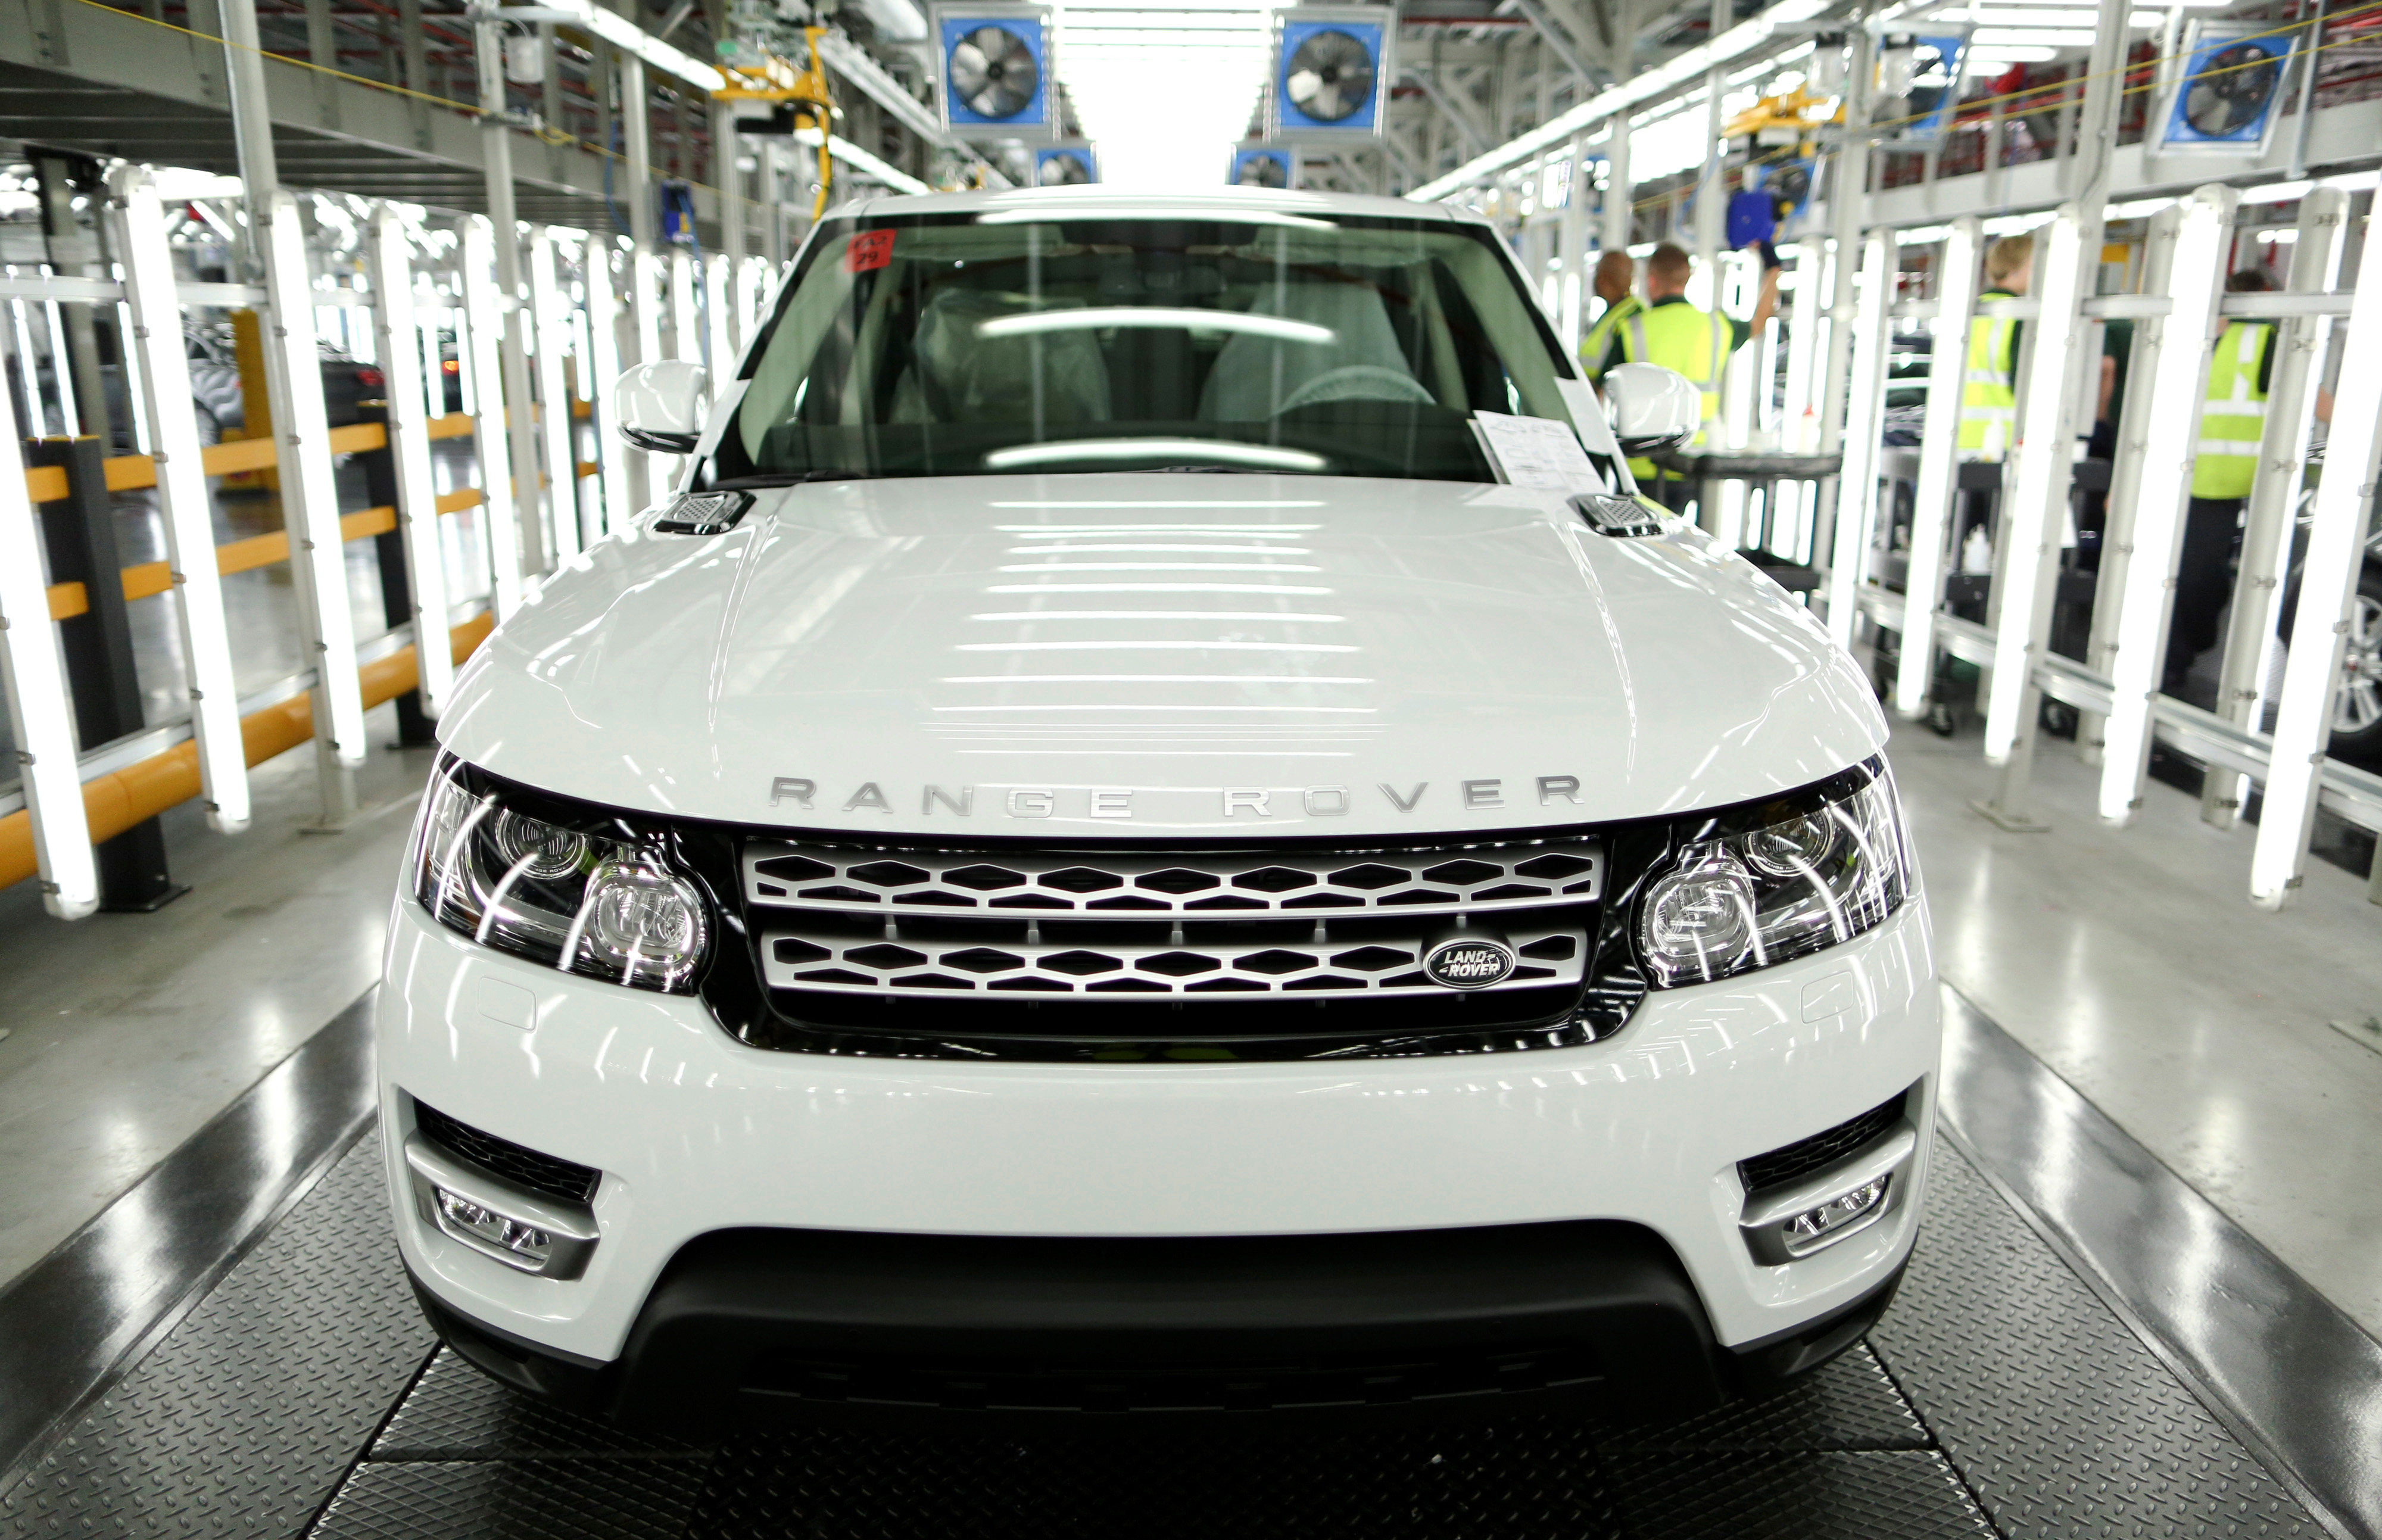 A Range Rover Sport SUV sits in a final inspection area at Tata Motors’ Jaguar Land Rover vehicle manufacturing plant in Solihull, UK, on Wednesday, July, 15, 2015. Photo: Bloomberg